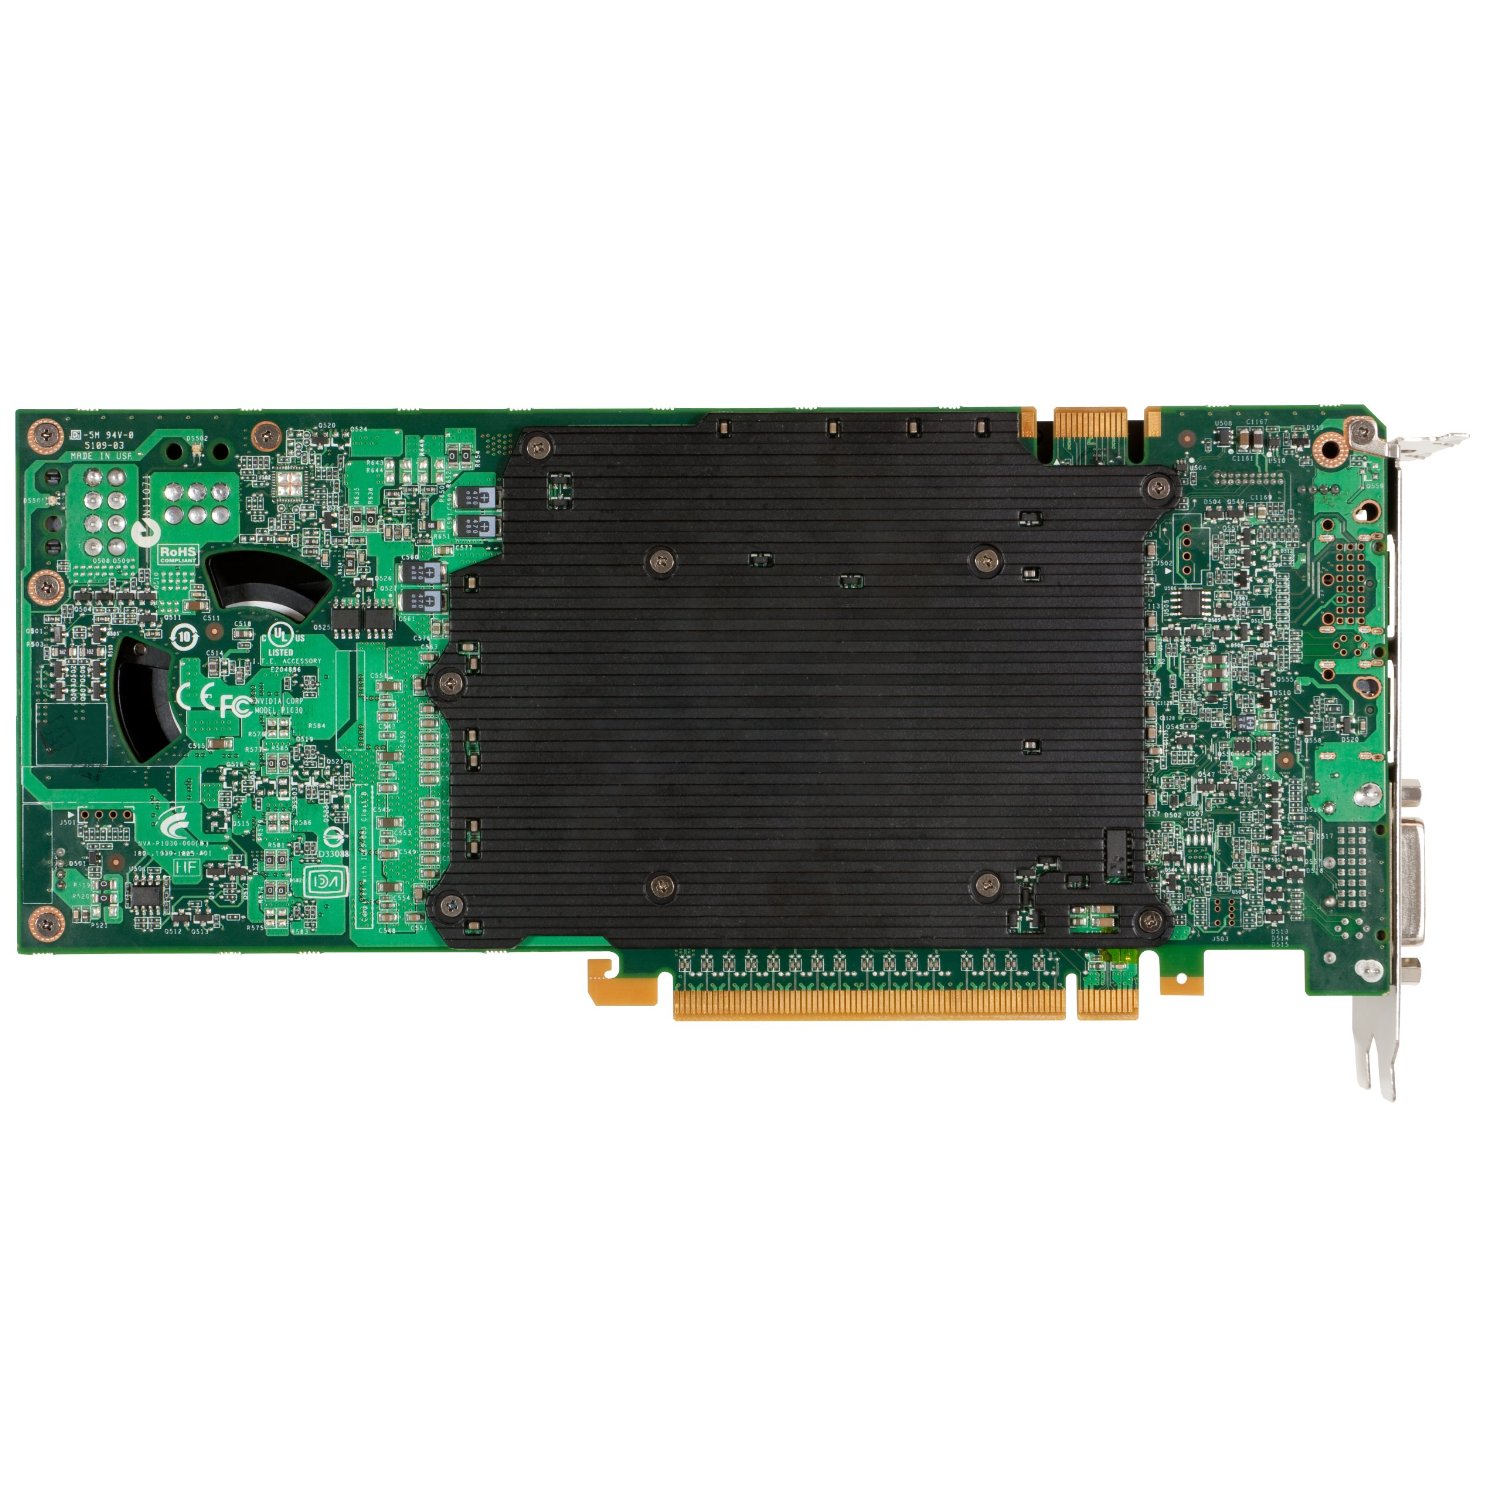 http://thetechjournal.com/wp-content/uploads/images/1112/1325149051-nvidia-quadro-6000-by-pny-6gb-gddr5-pci-express-graphics-card-6.jpg